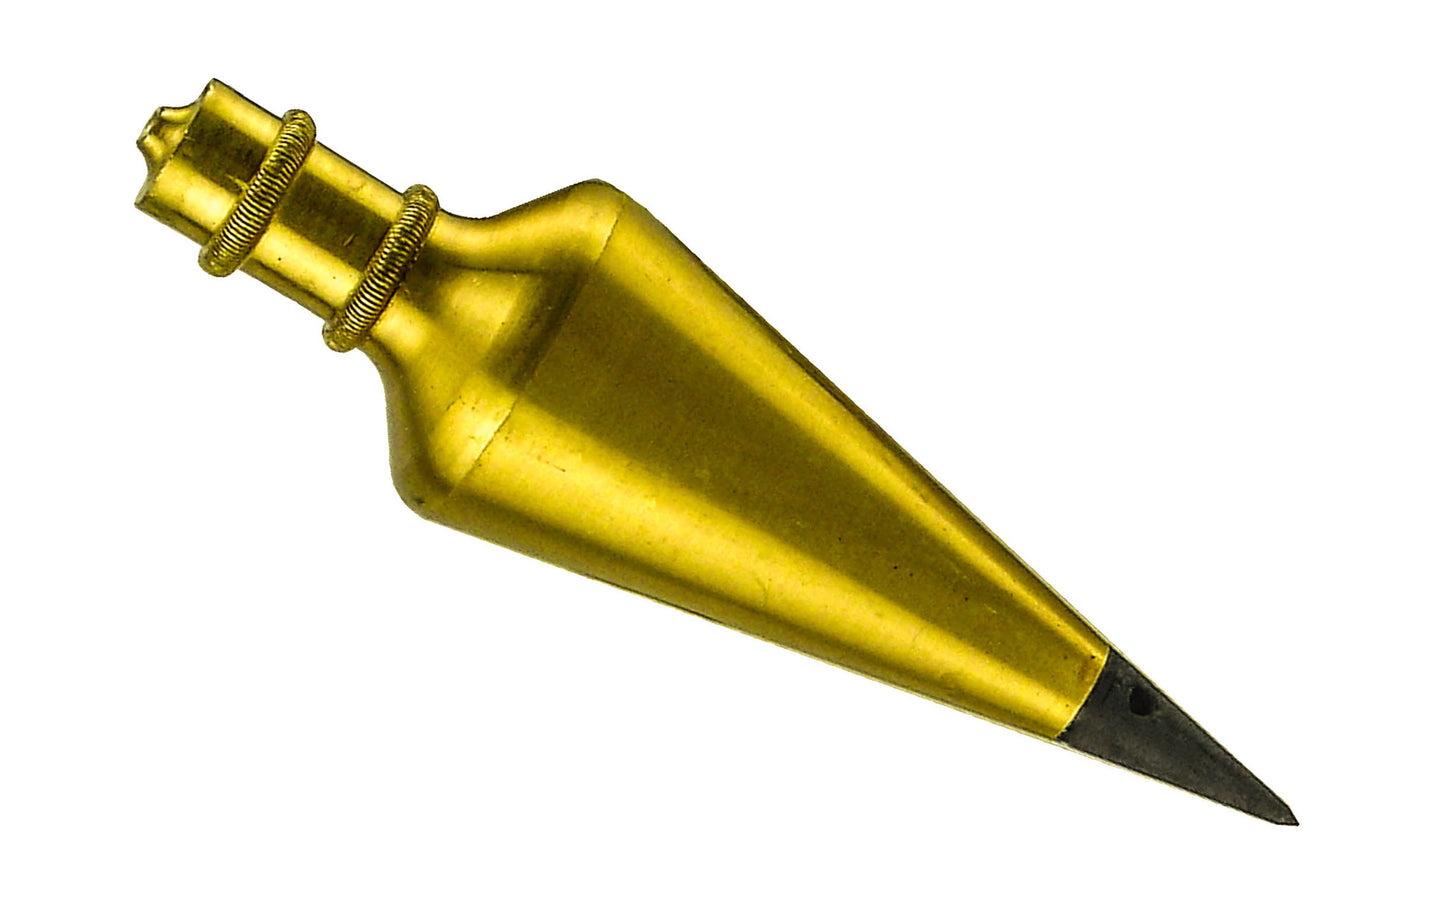 Solid Brass Plumb Bob ~ 8 oz ~ Machined of solid brass, fully polished & lacquered ~ Hardened steel point ~ Braided cord ~ Preferred by masonry, carpentry & surveying professionals ~ General Tools 800-8 ~ 038728426246